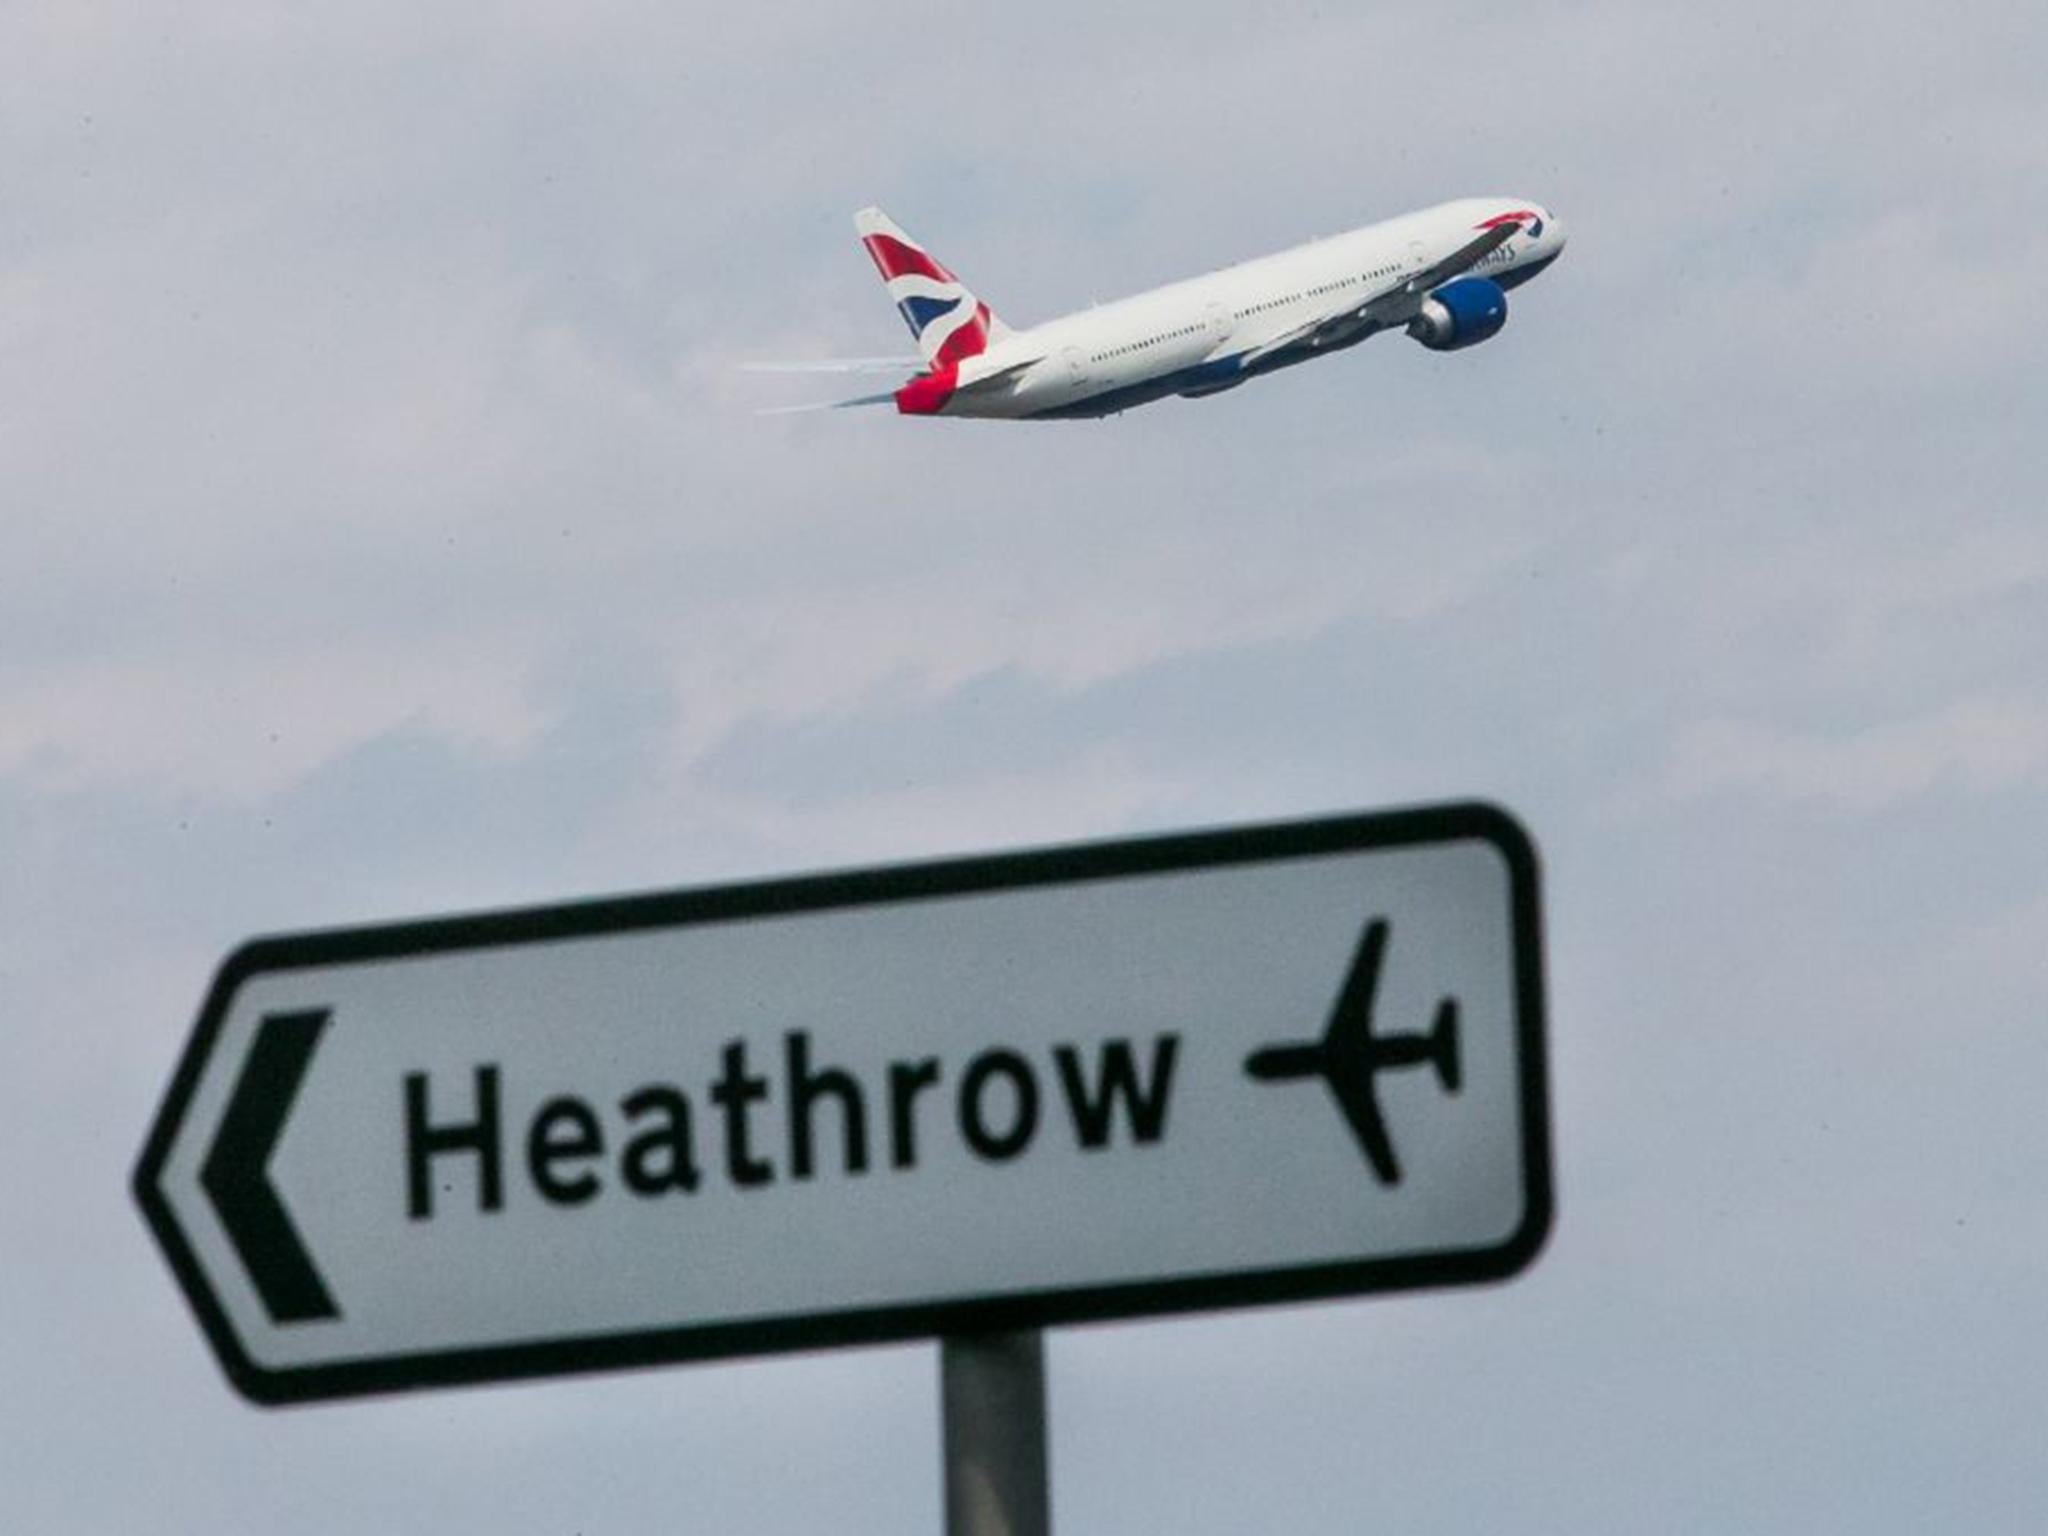 &#13;
In 2006, the strict new rules immediately brought Heathrow airport almost to a standstill, and traumatised the flight network elsewhere in Britain &#13;